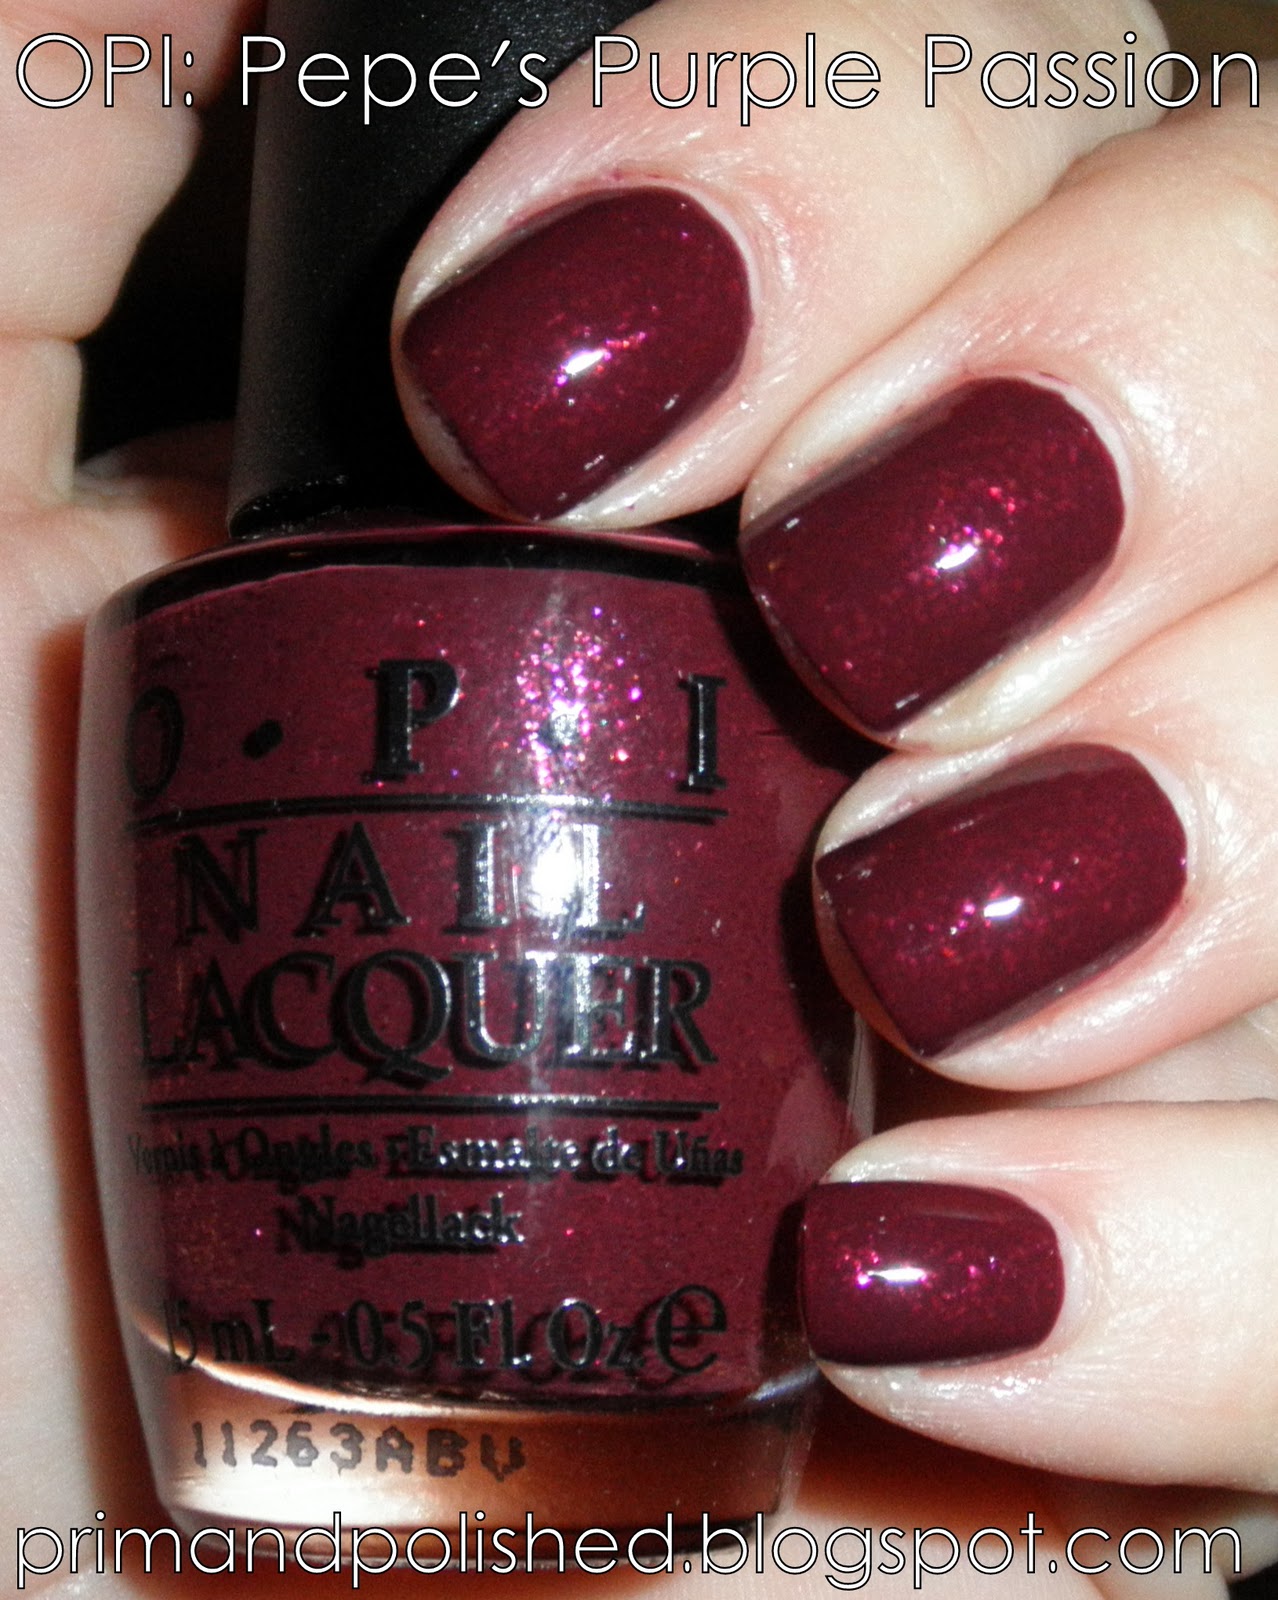 Prim and Polished Blog: OPI: Pepe's Purple Passion: (Muppets Collection)